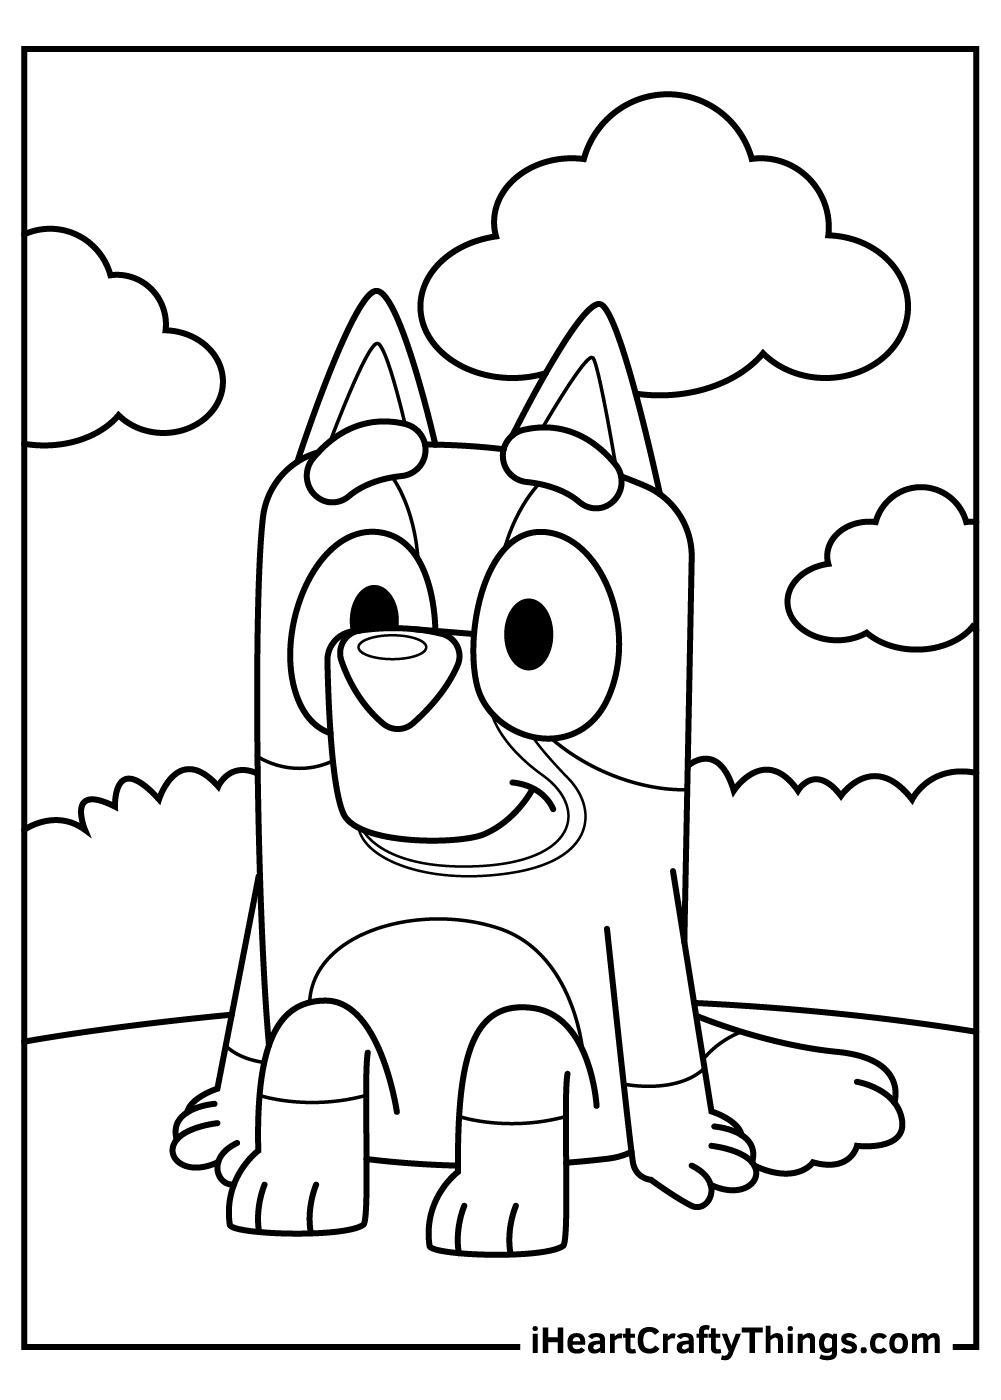 Printable Bluey Coloring Pages Printable Word Searches